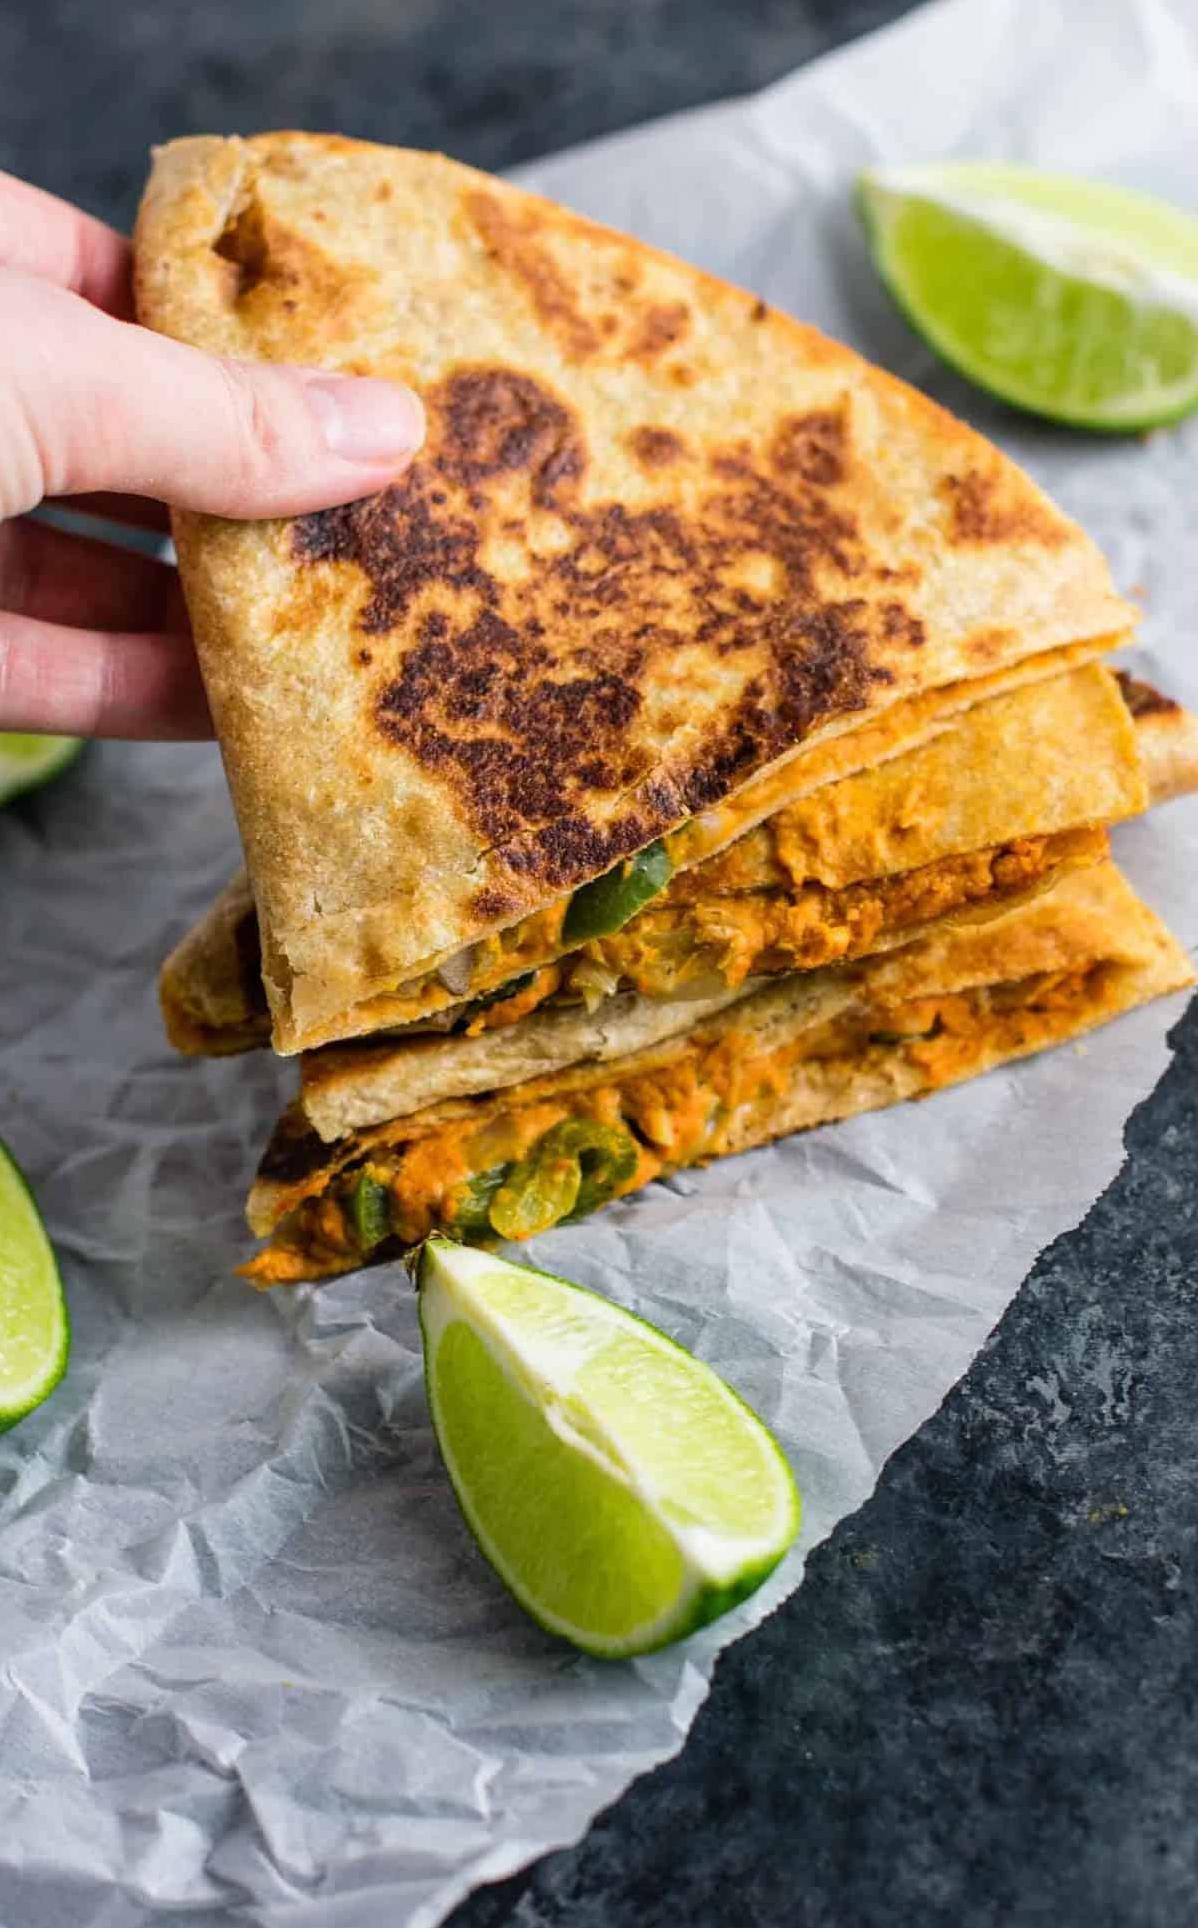  Add some plant-based protein to your diet with these vegan quesadillas!